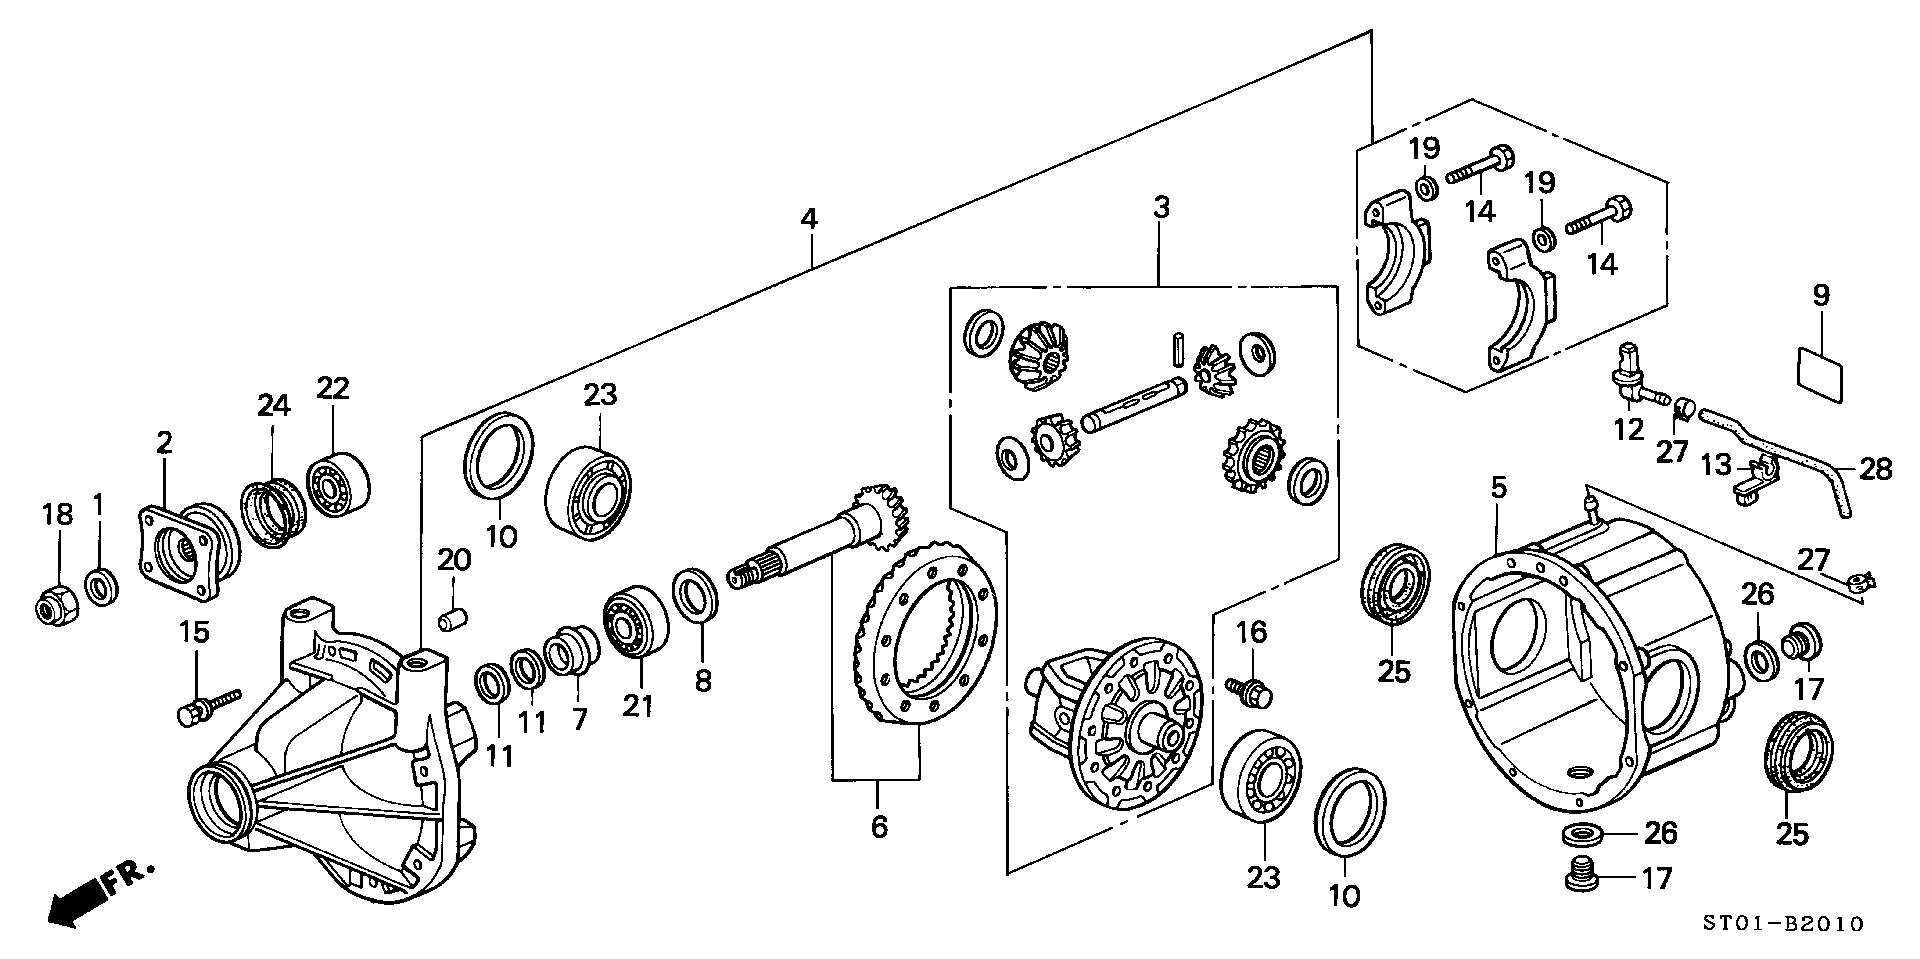 REAR DIFFERENTIAL(MA6:100)